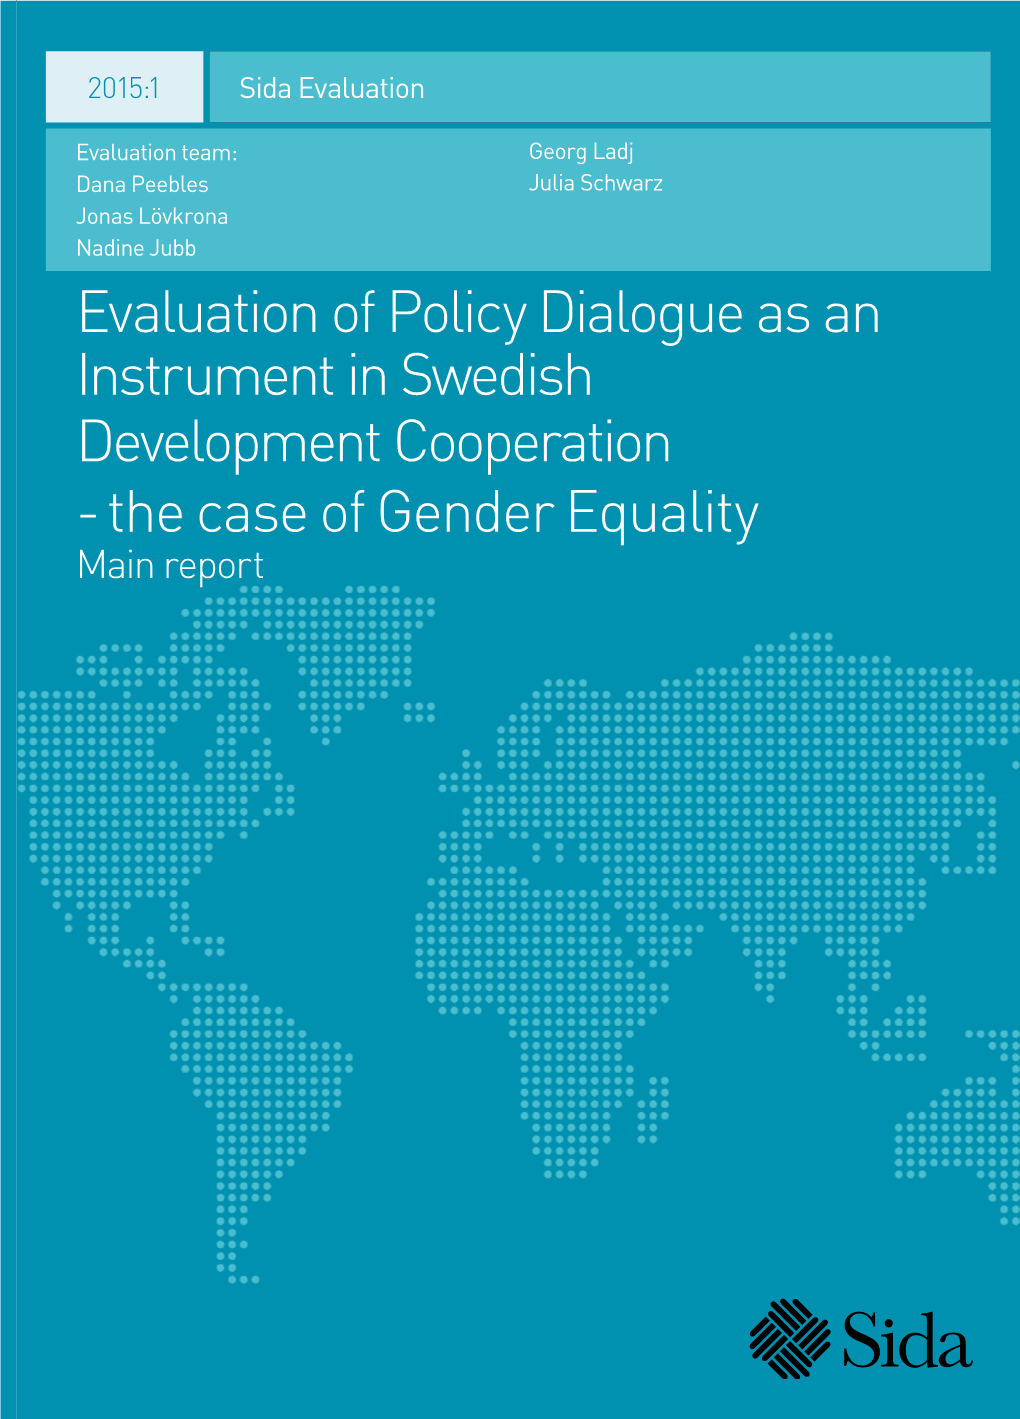 Evaluation of Policy Dialogue As an Instrument in Swedish Development Co-Operation – the Case of Gender Equality”